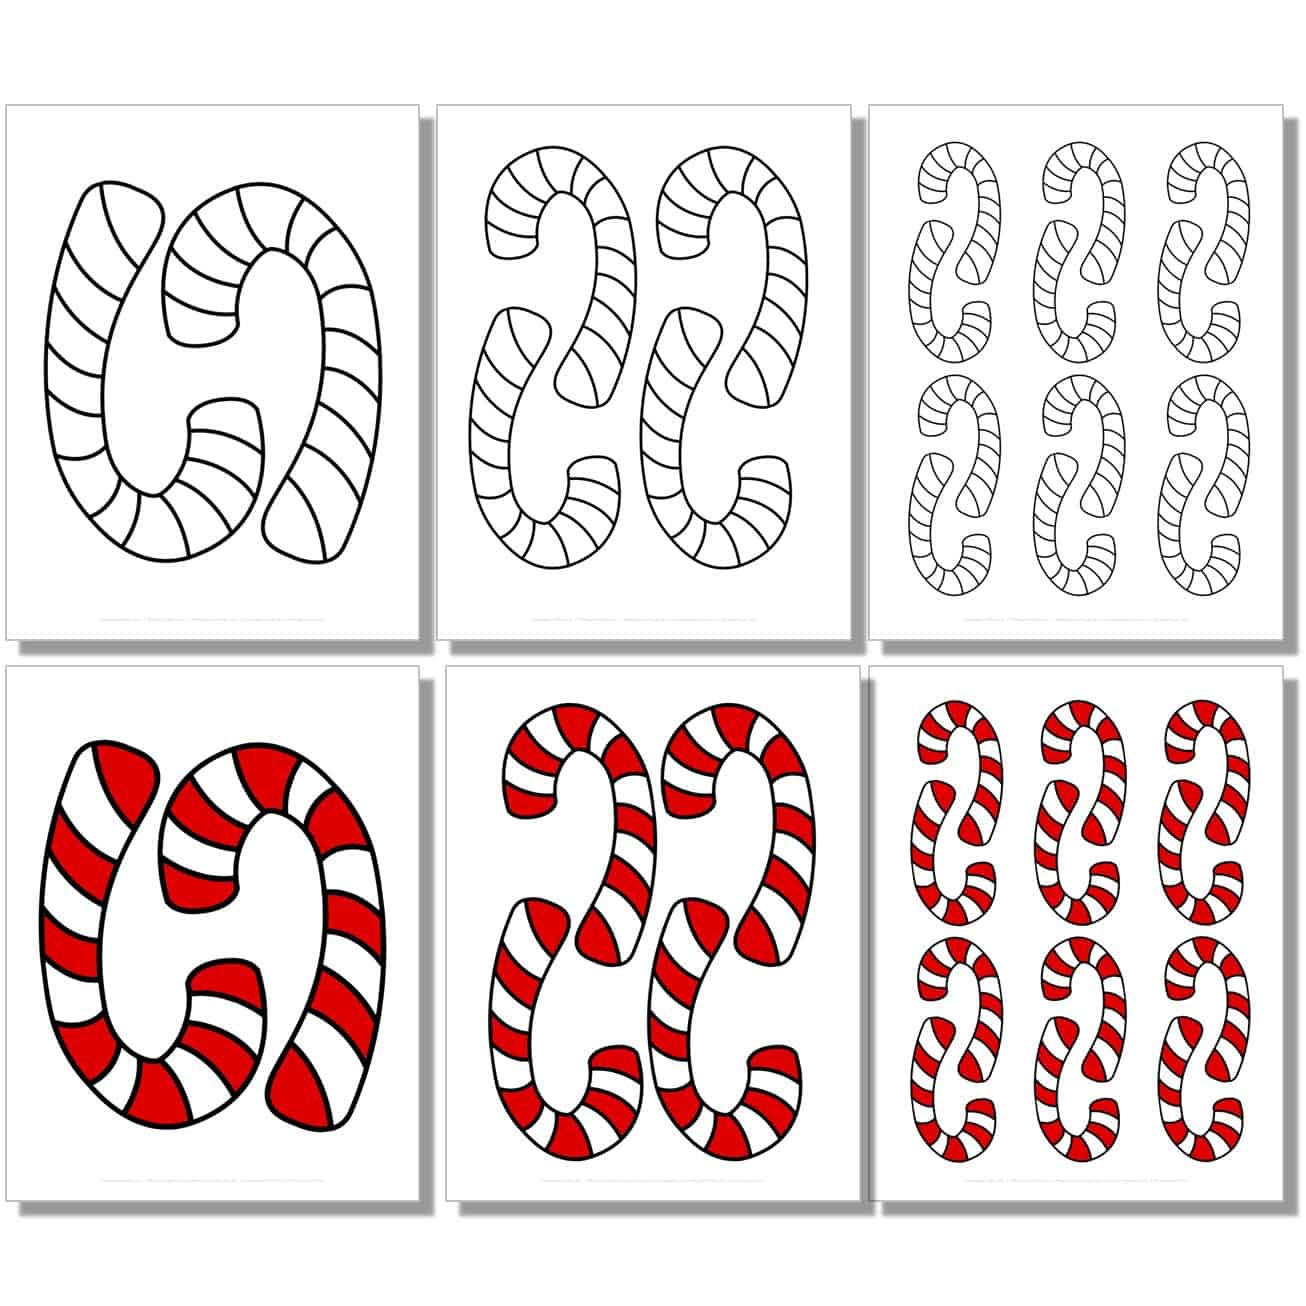 free small, medium, large curved candy cane template in black, white, color